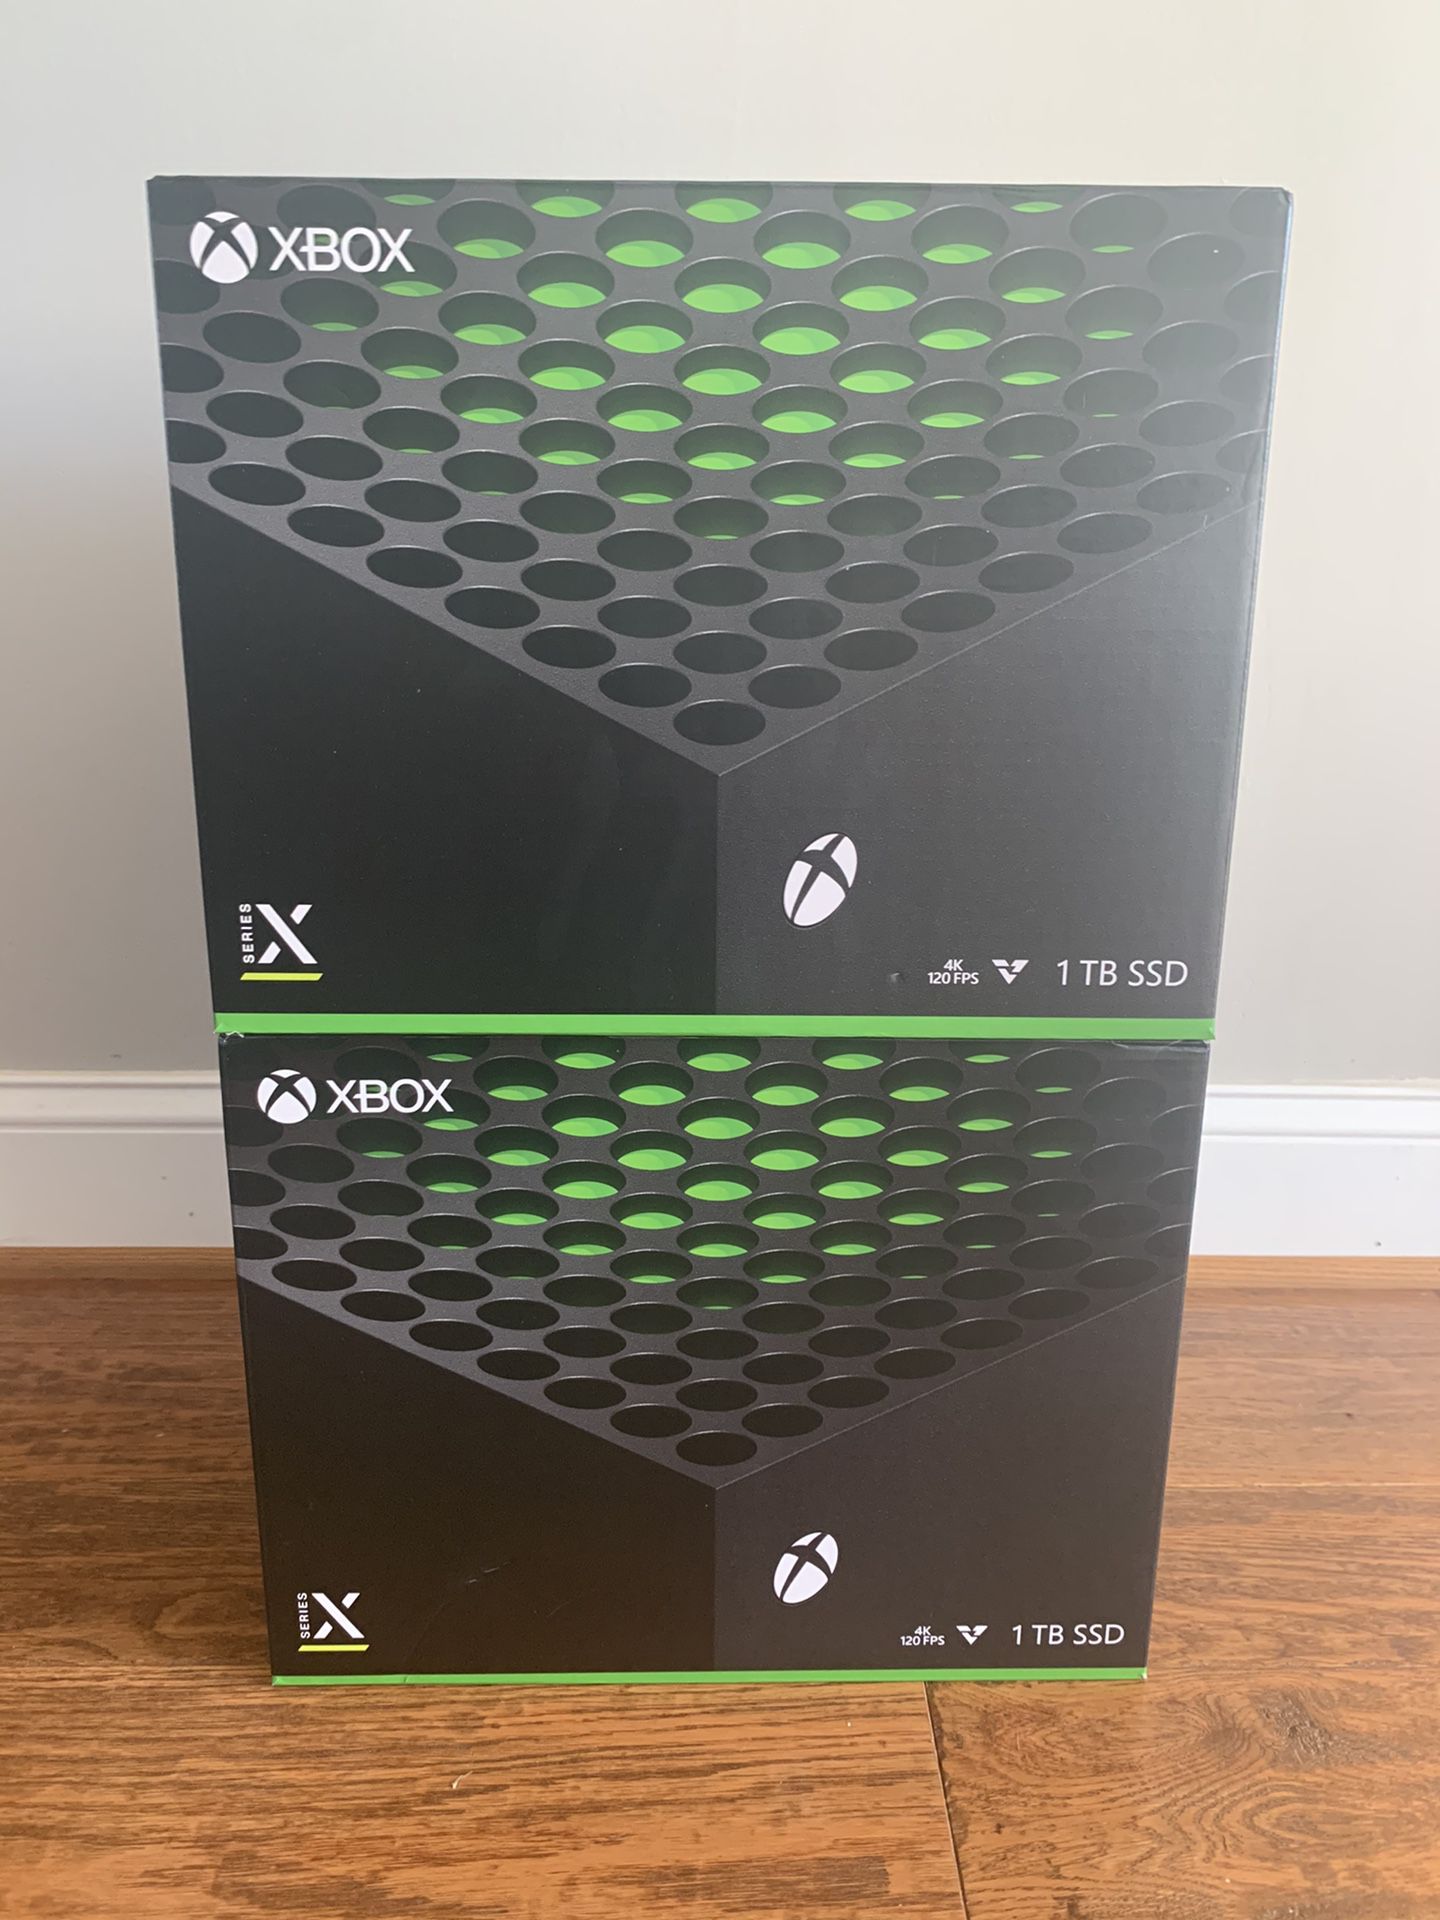 Xbox X, brand new in hand with proof of purchase